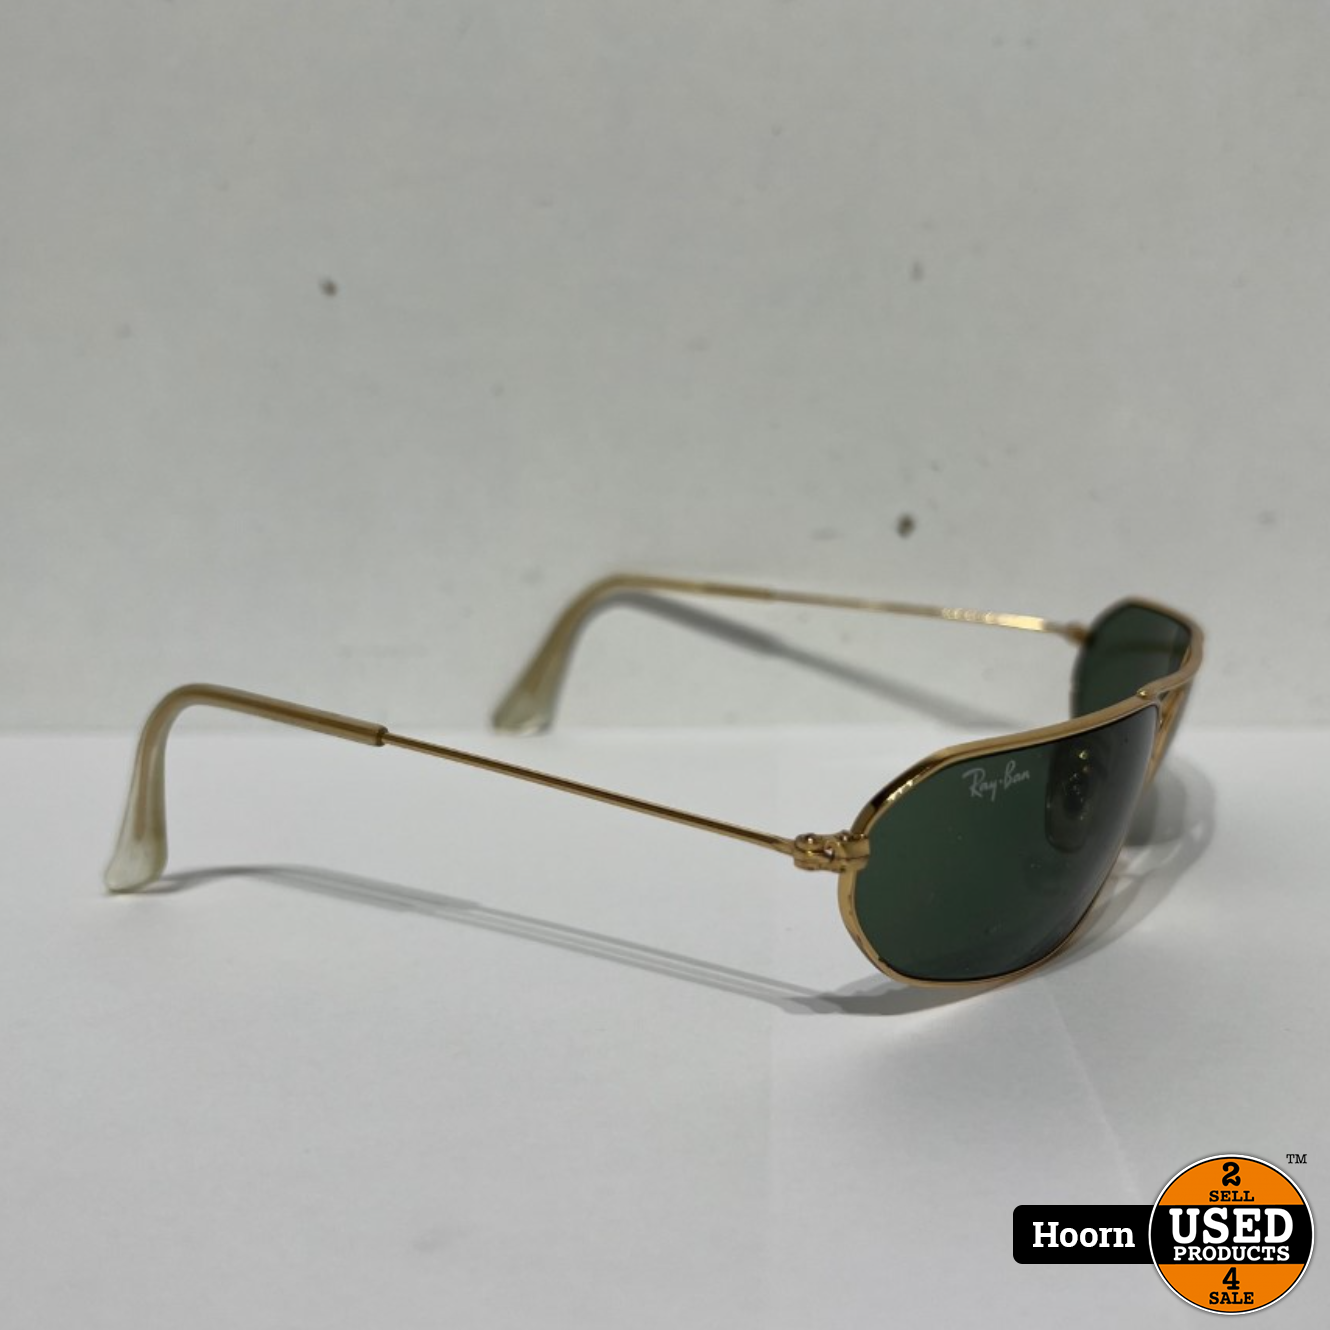 Leia Wiskunde Octrooi Ray-Ban Heren Zonnebril - Used Products Hoorn